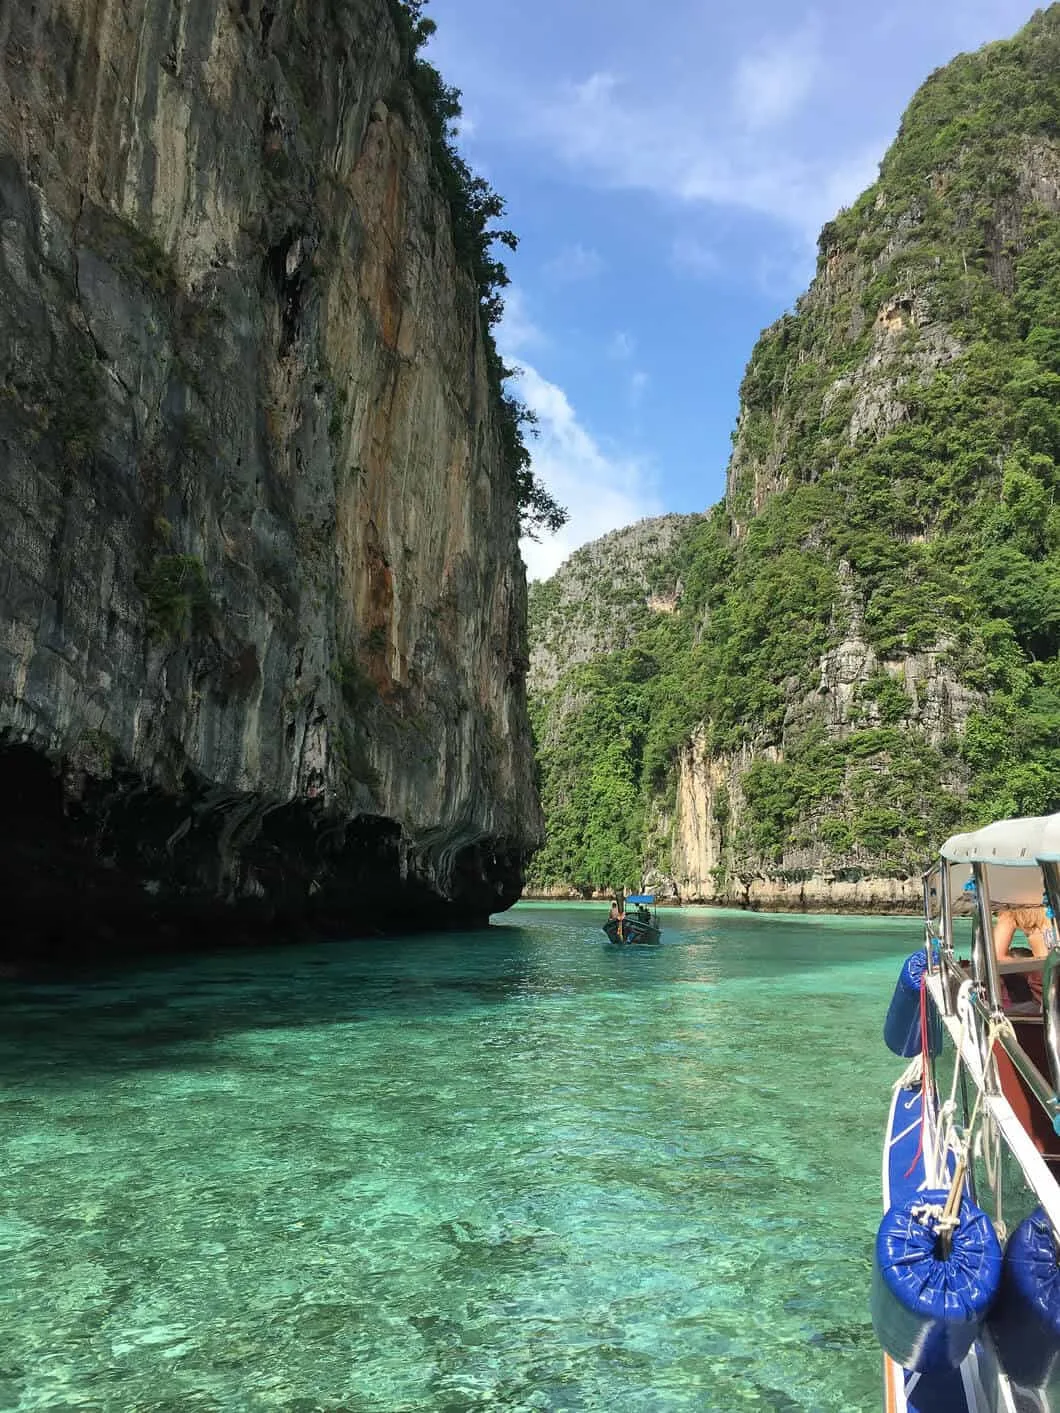 A POV of being on a boat between the limestone cliffs of Krabi.